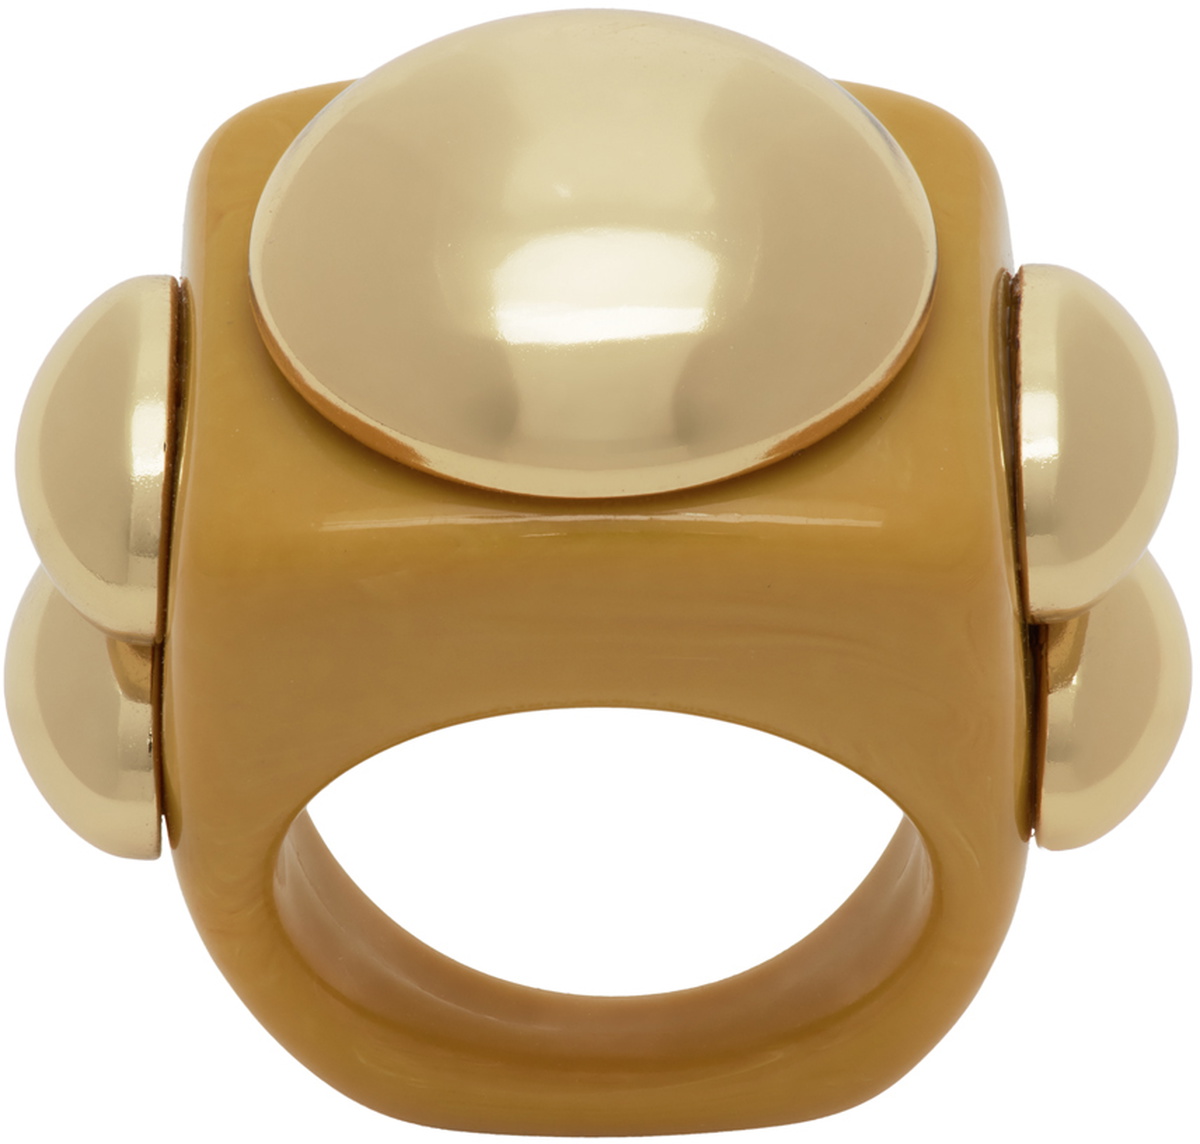 La Manso Yellow Camel From Camel Ring